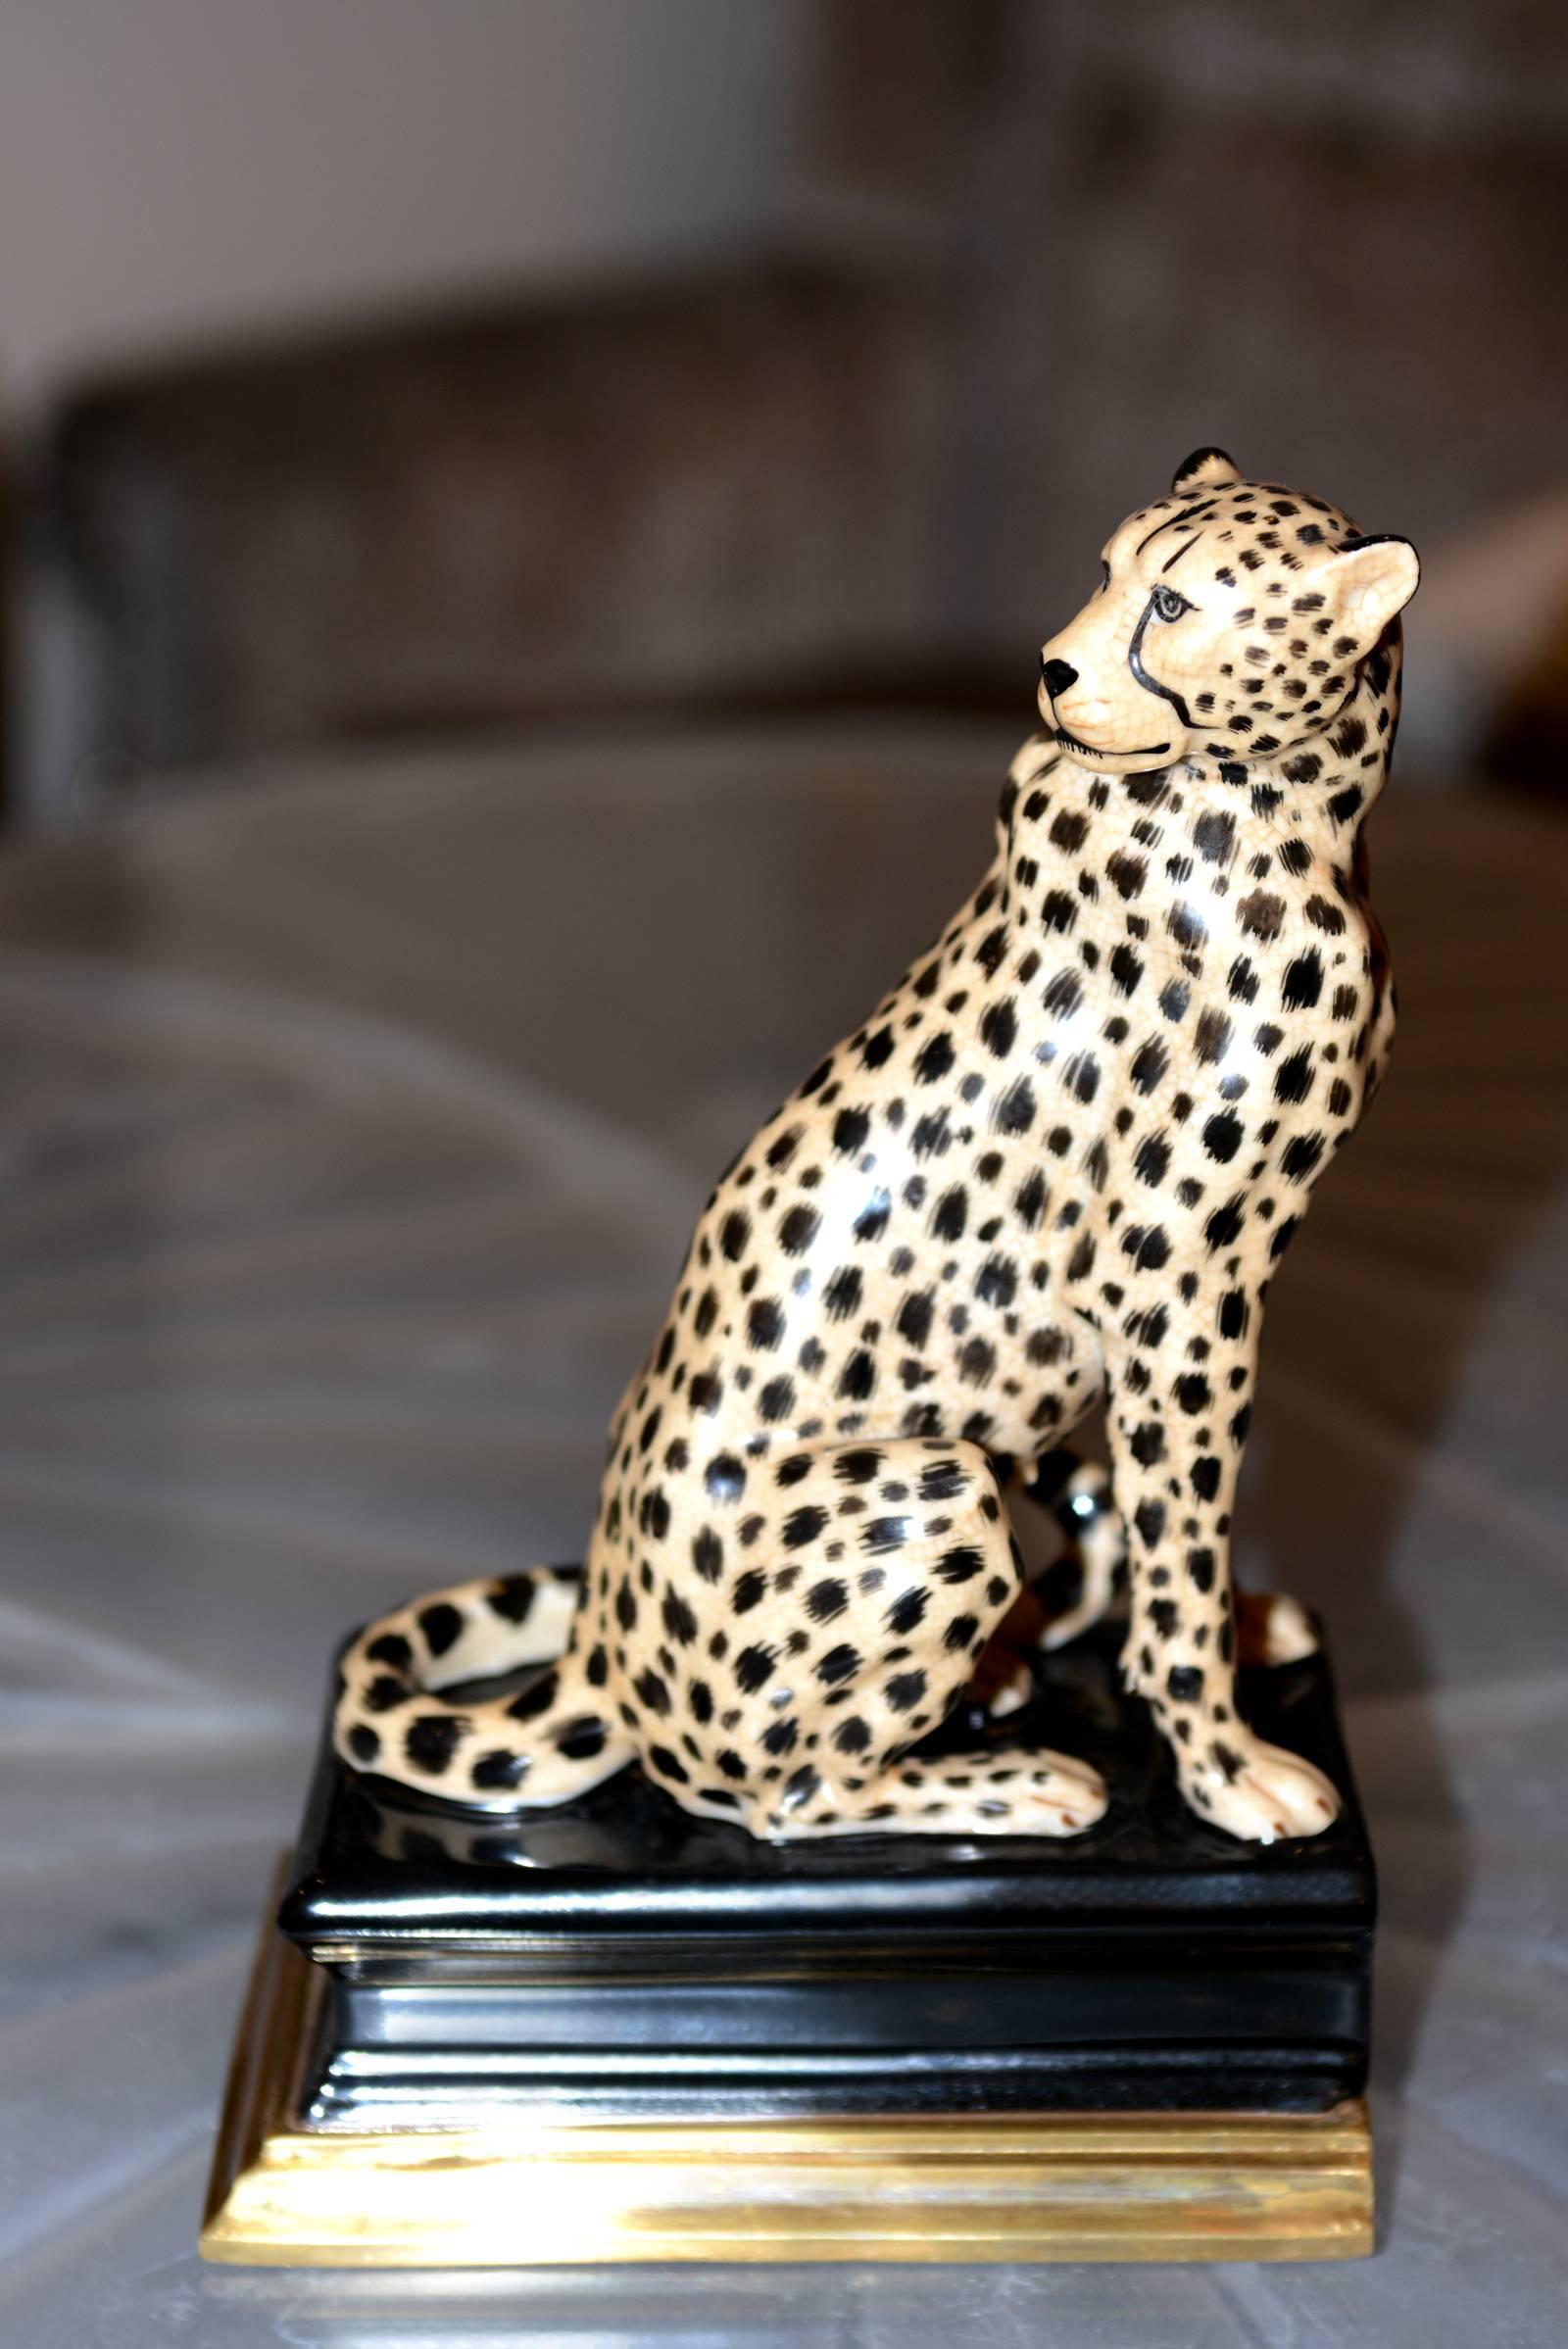 Set of two bookends Cheetah in porcelain
on black porcelain socle with brass base.
Elegant and subtle exceptional piece.
